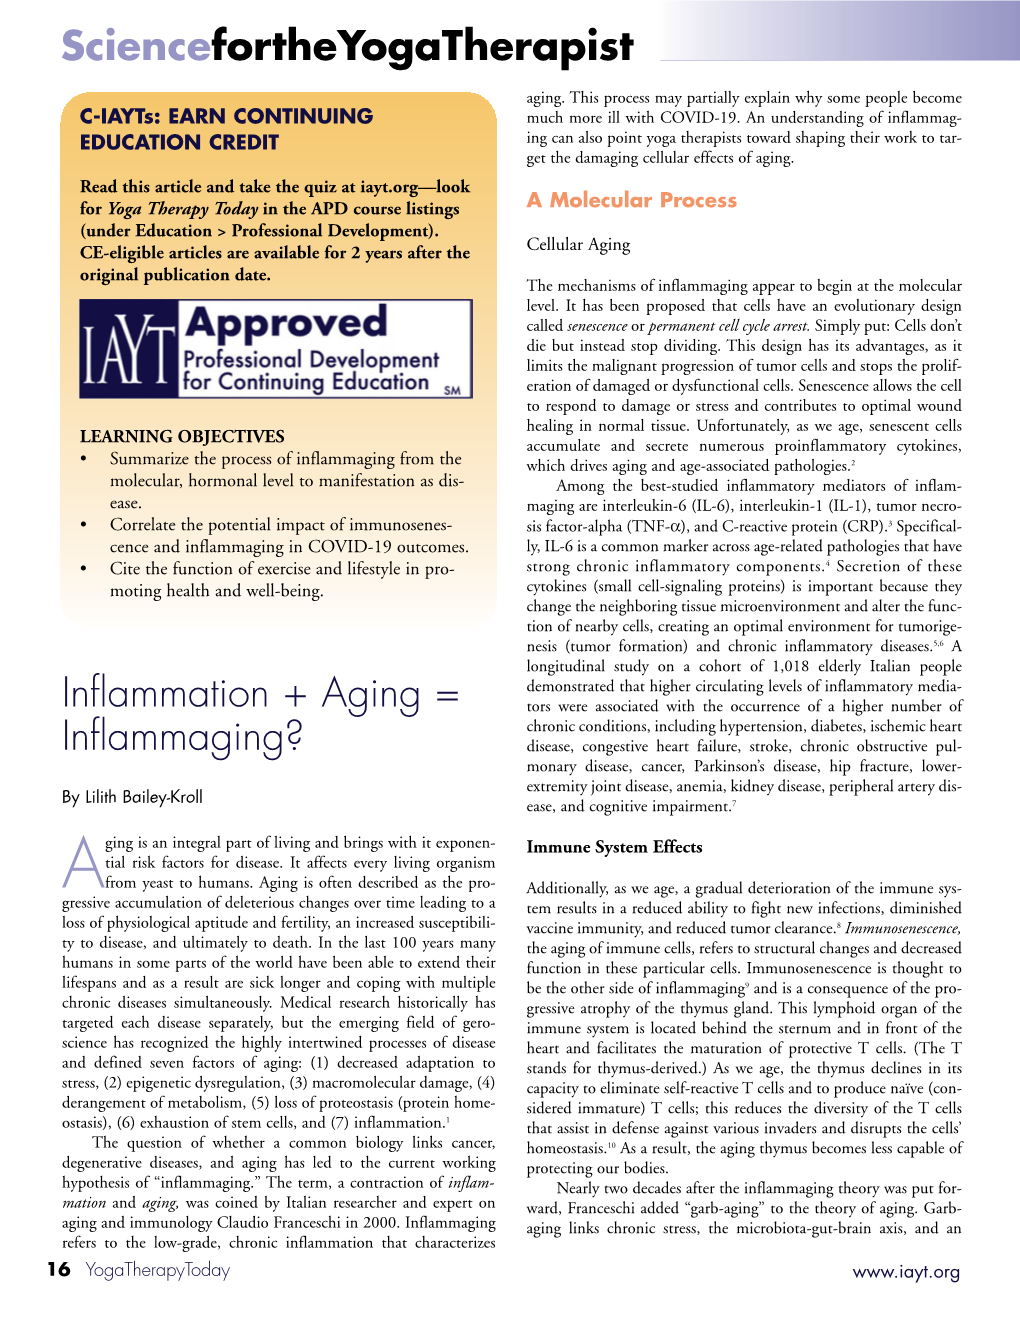 Inflammation + Aging = Inflammaging?